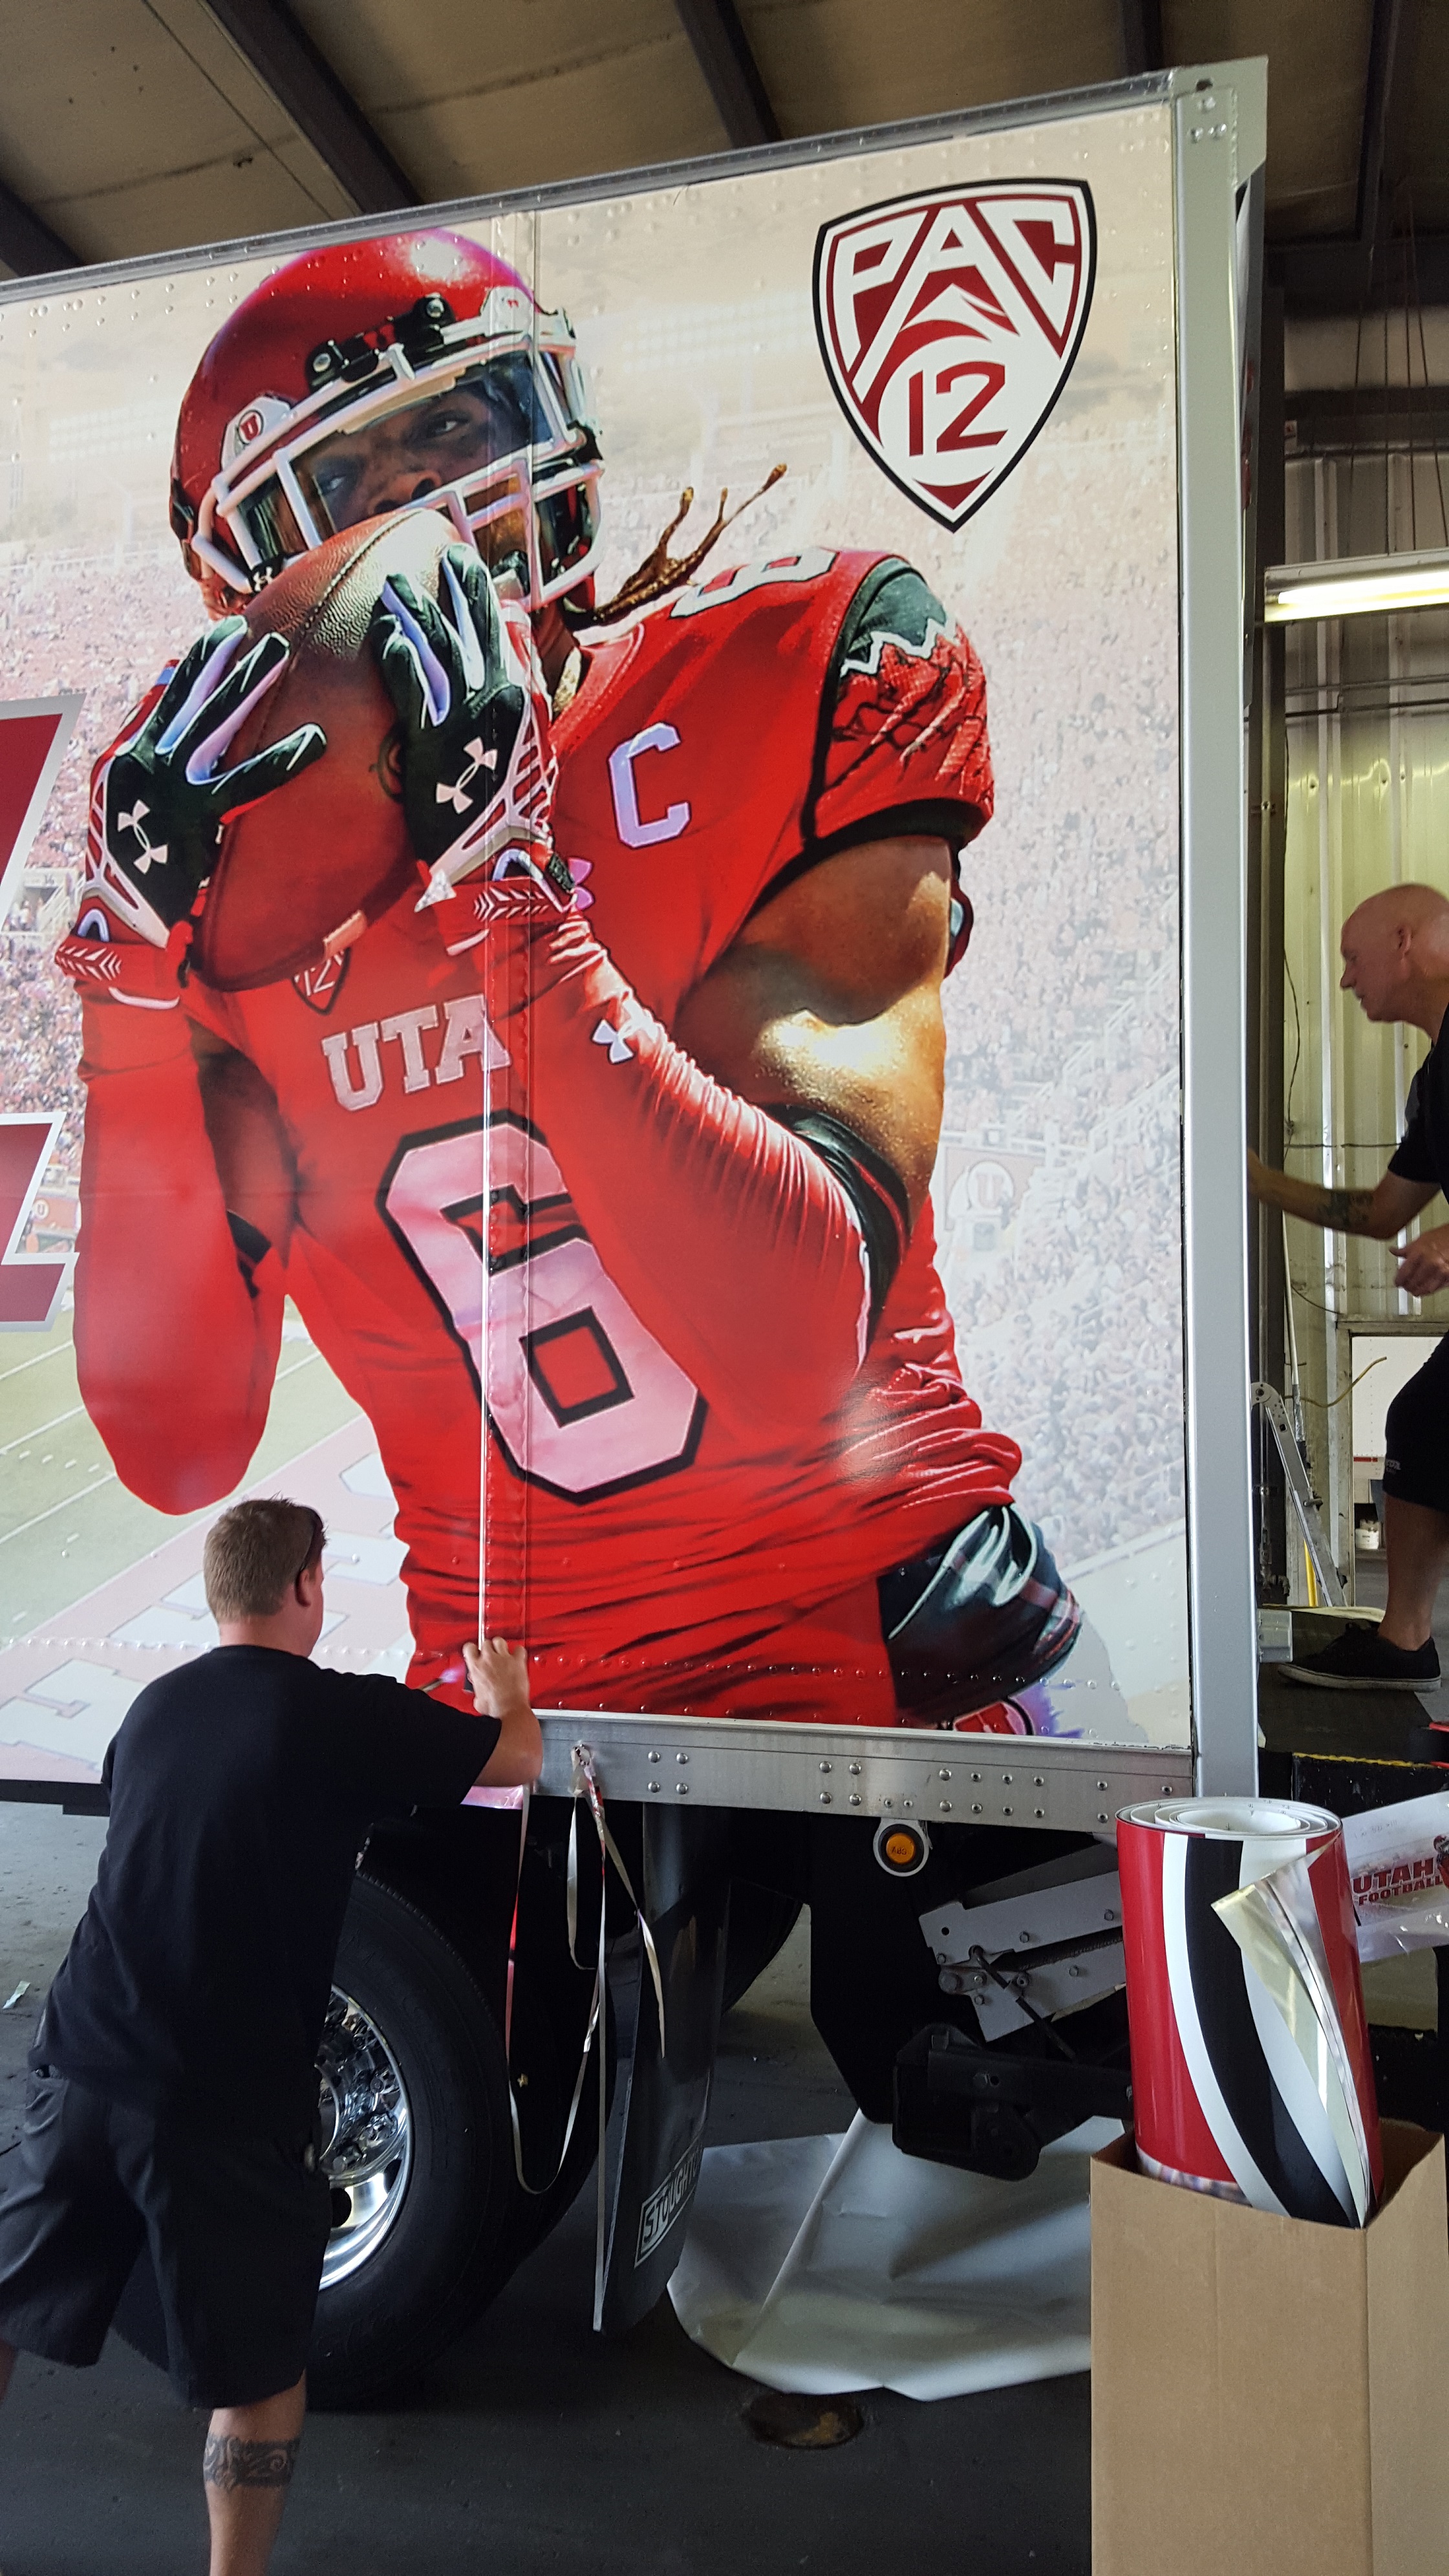 Vehicle Wrap that shows a University of Utah Football Player 